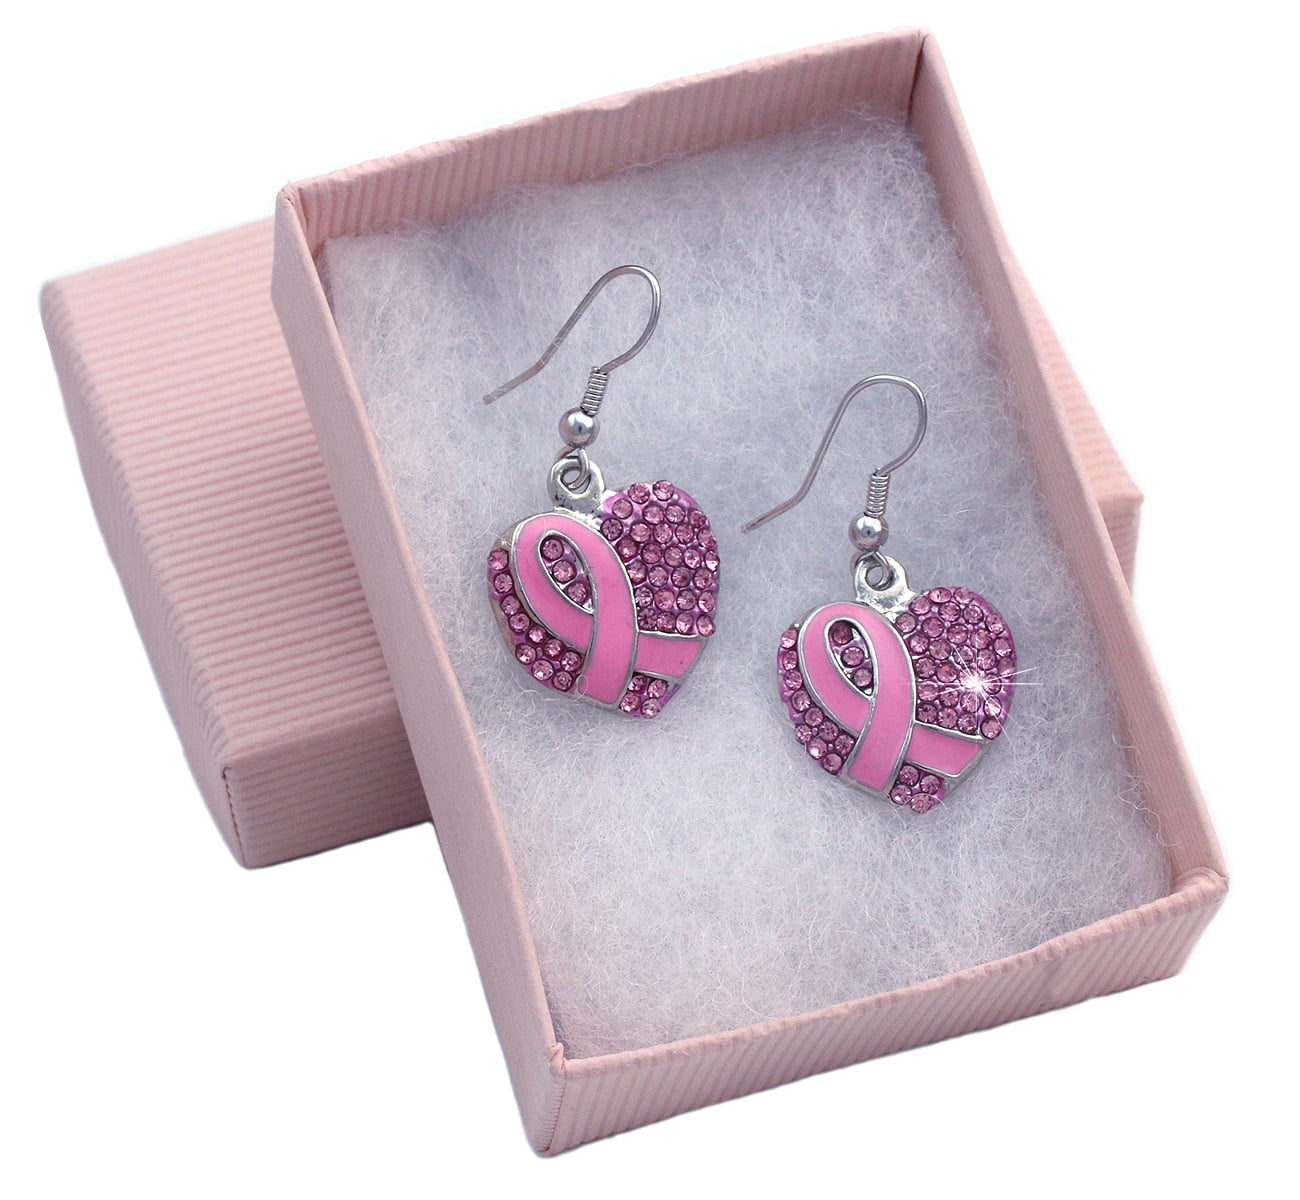 Support Breast Cancer Awareness Pink Ribbon Boxing Glove Heart Earrings 